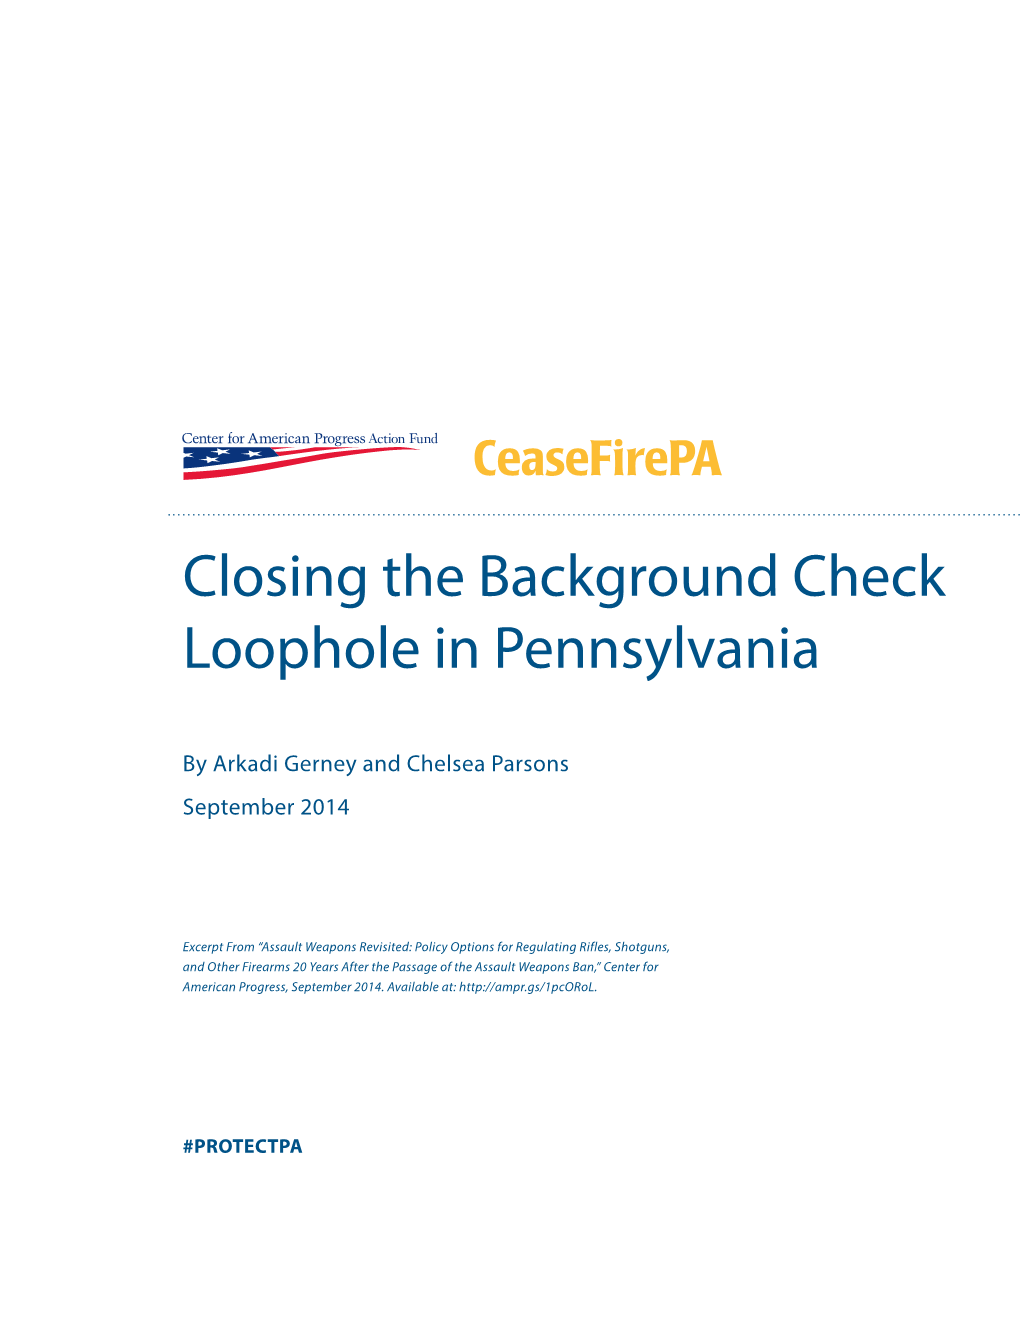 Closing the Background Check Loophole in Pennsylvania